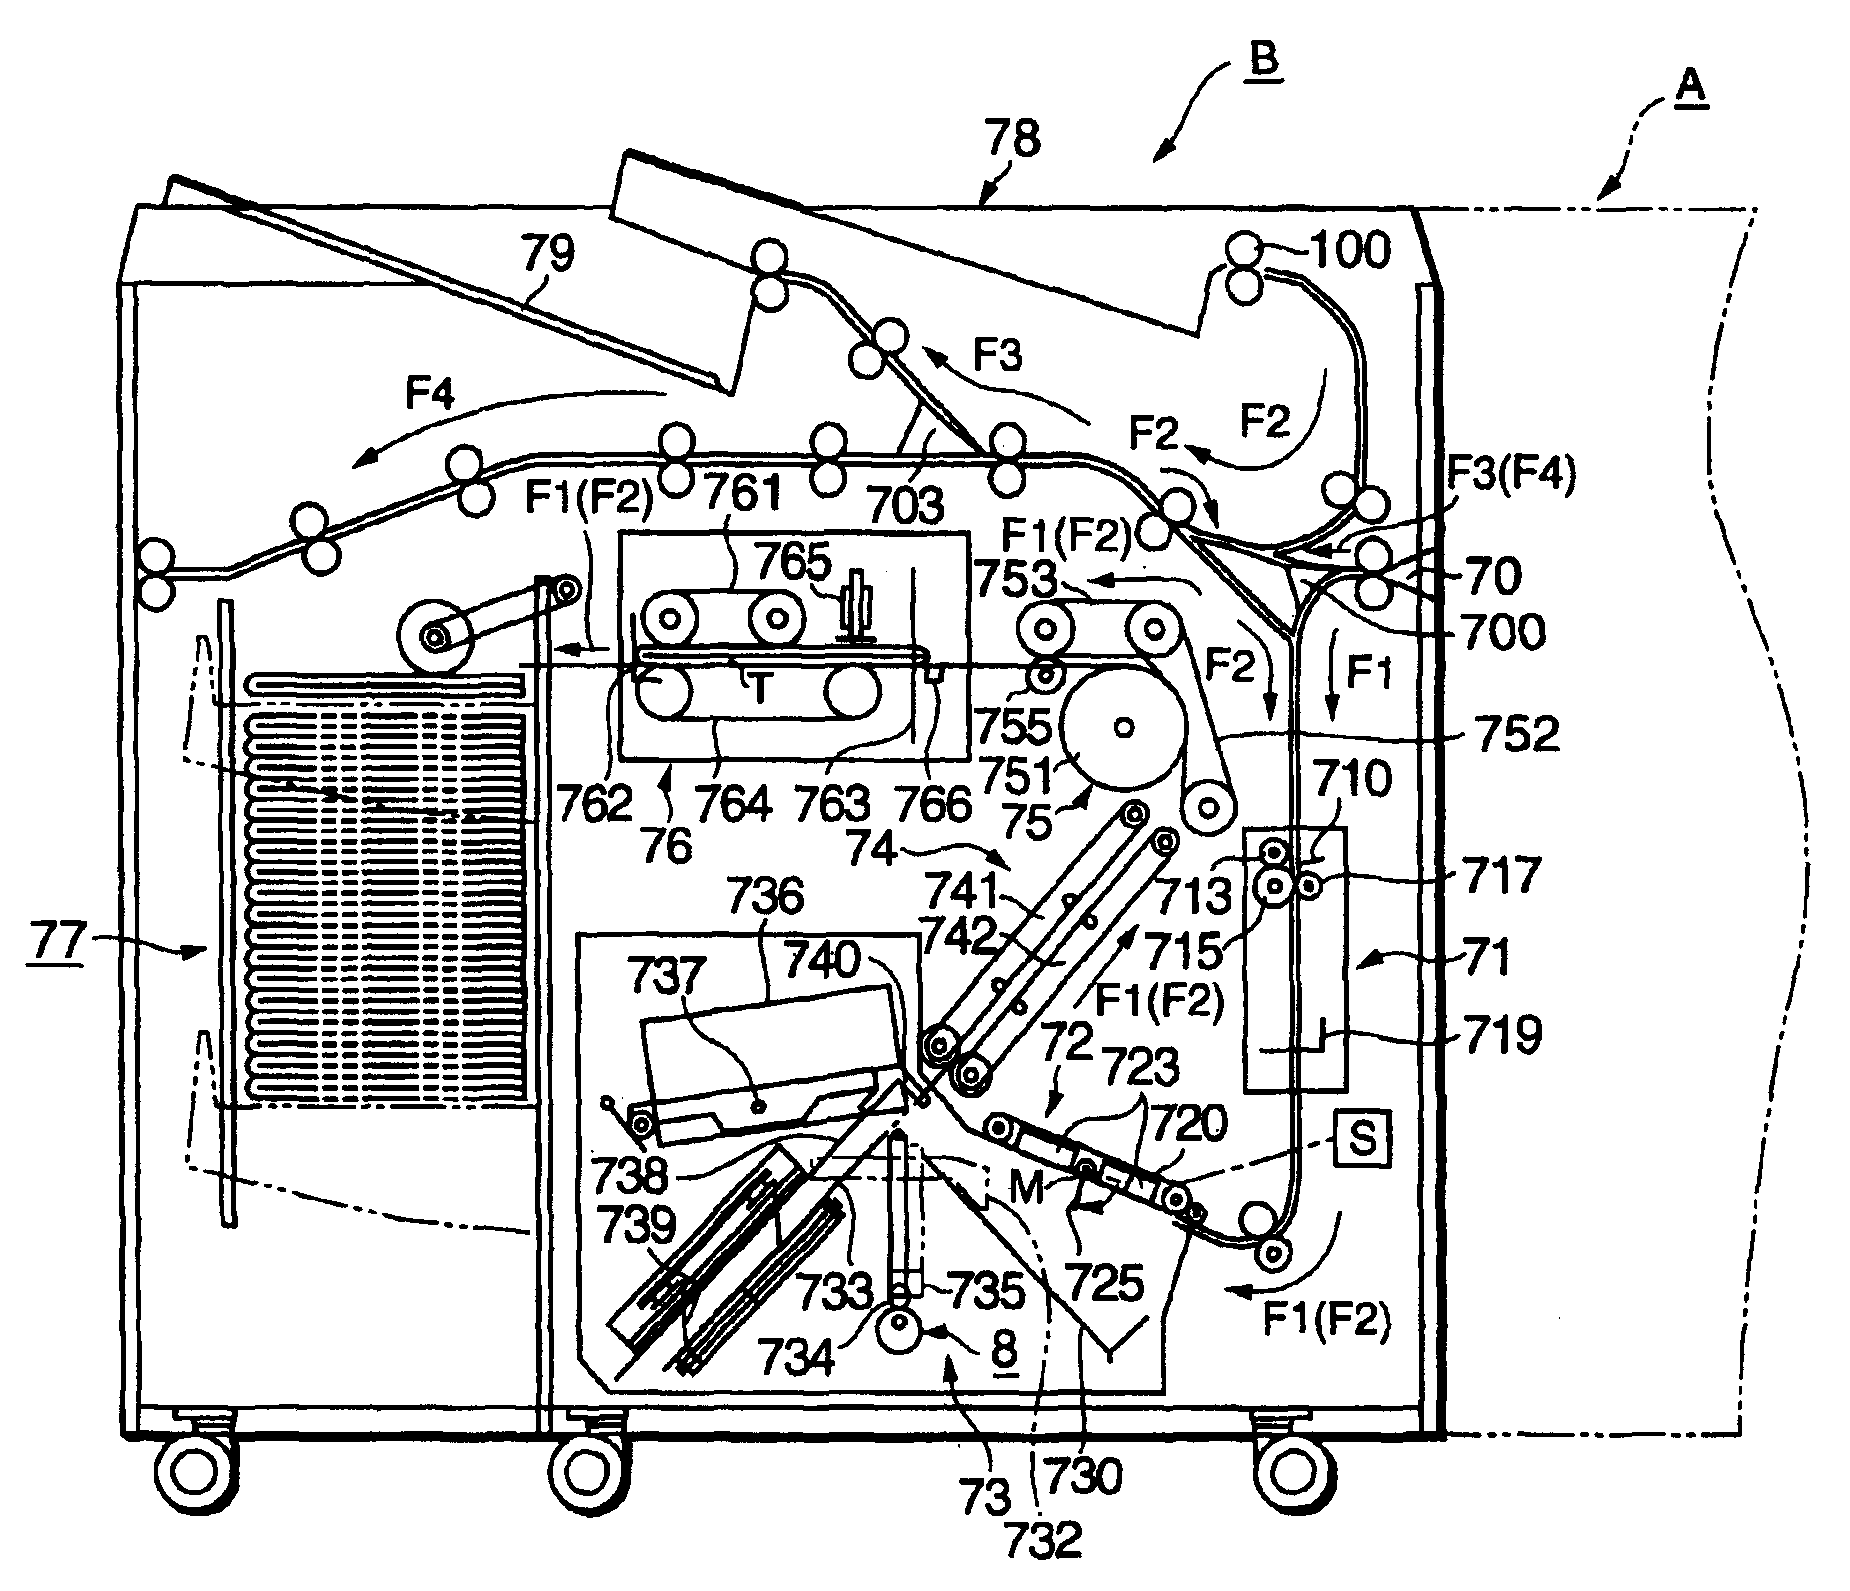 Post processing device with saddle stitching